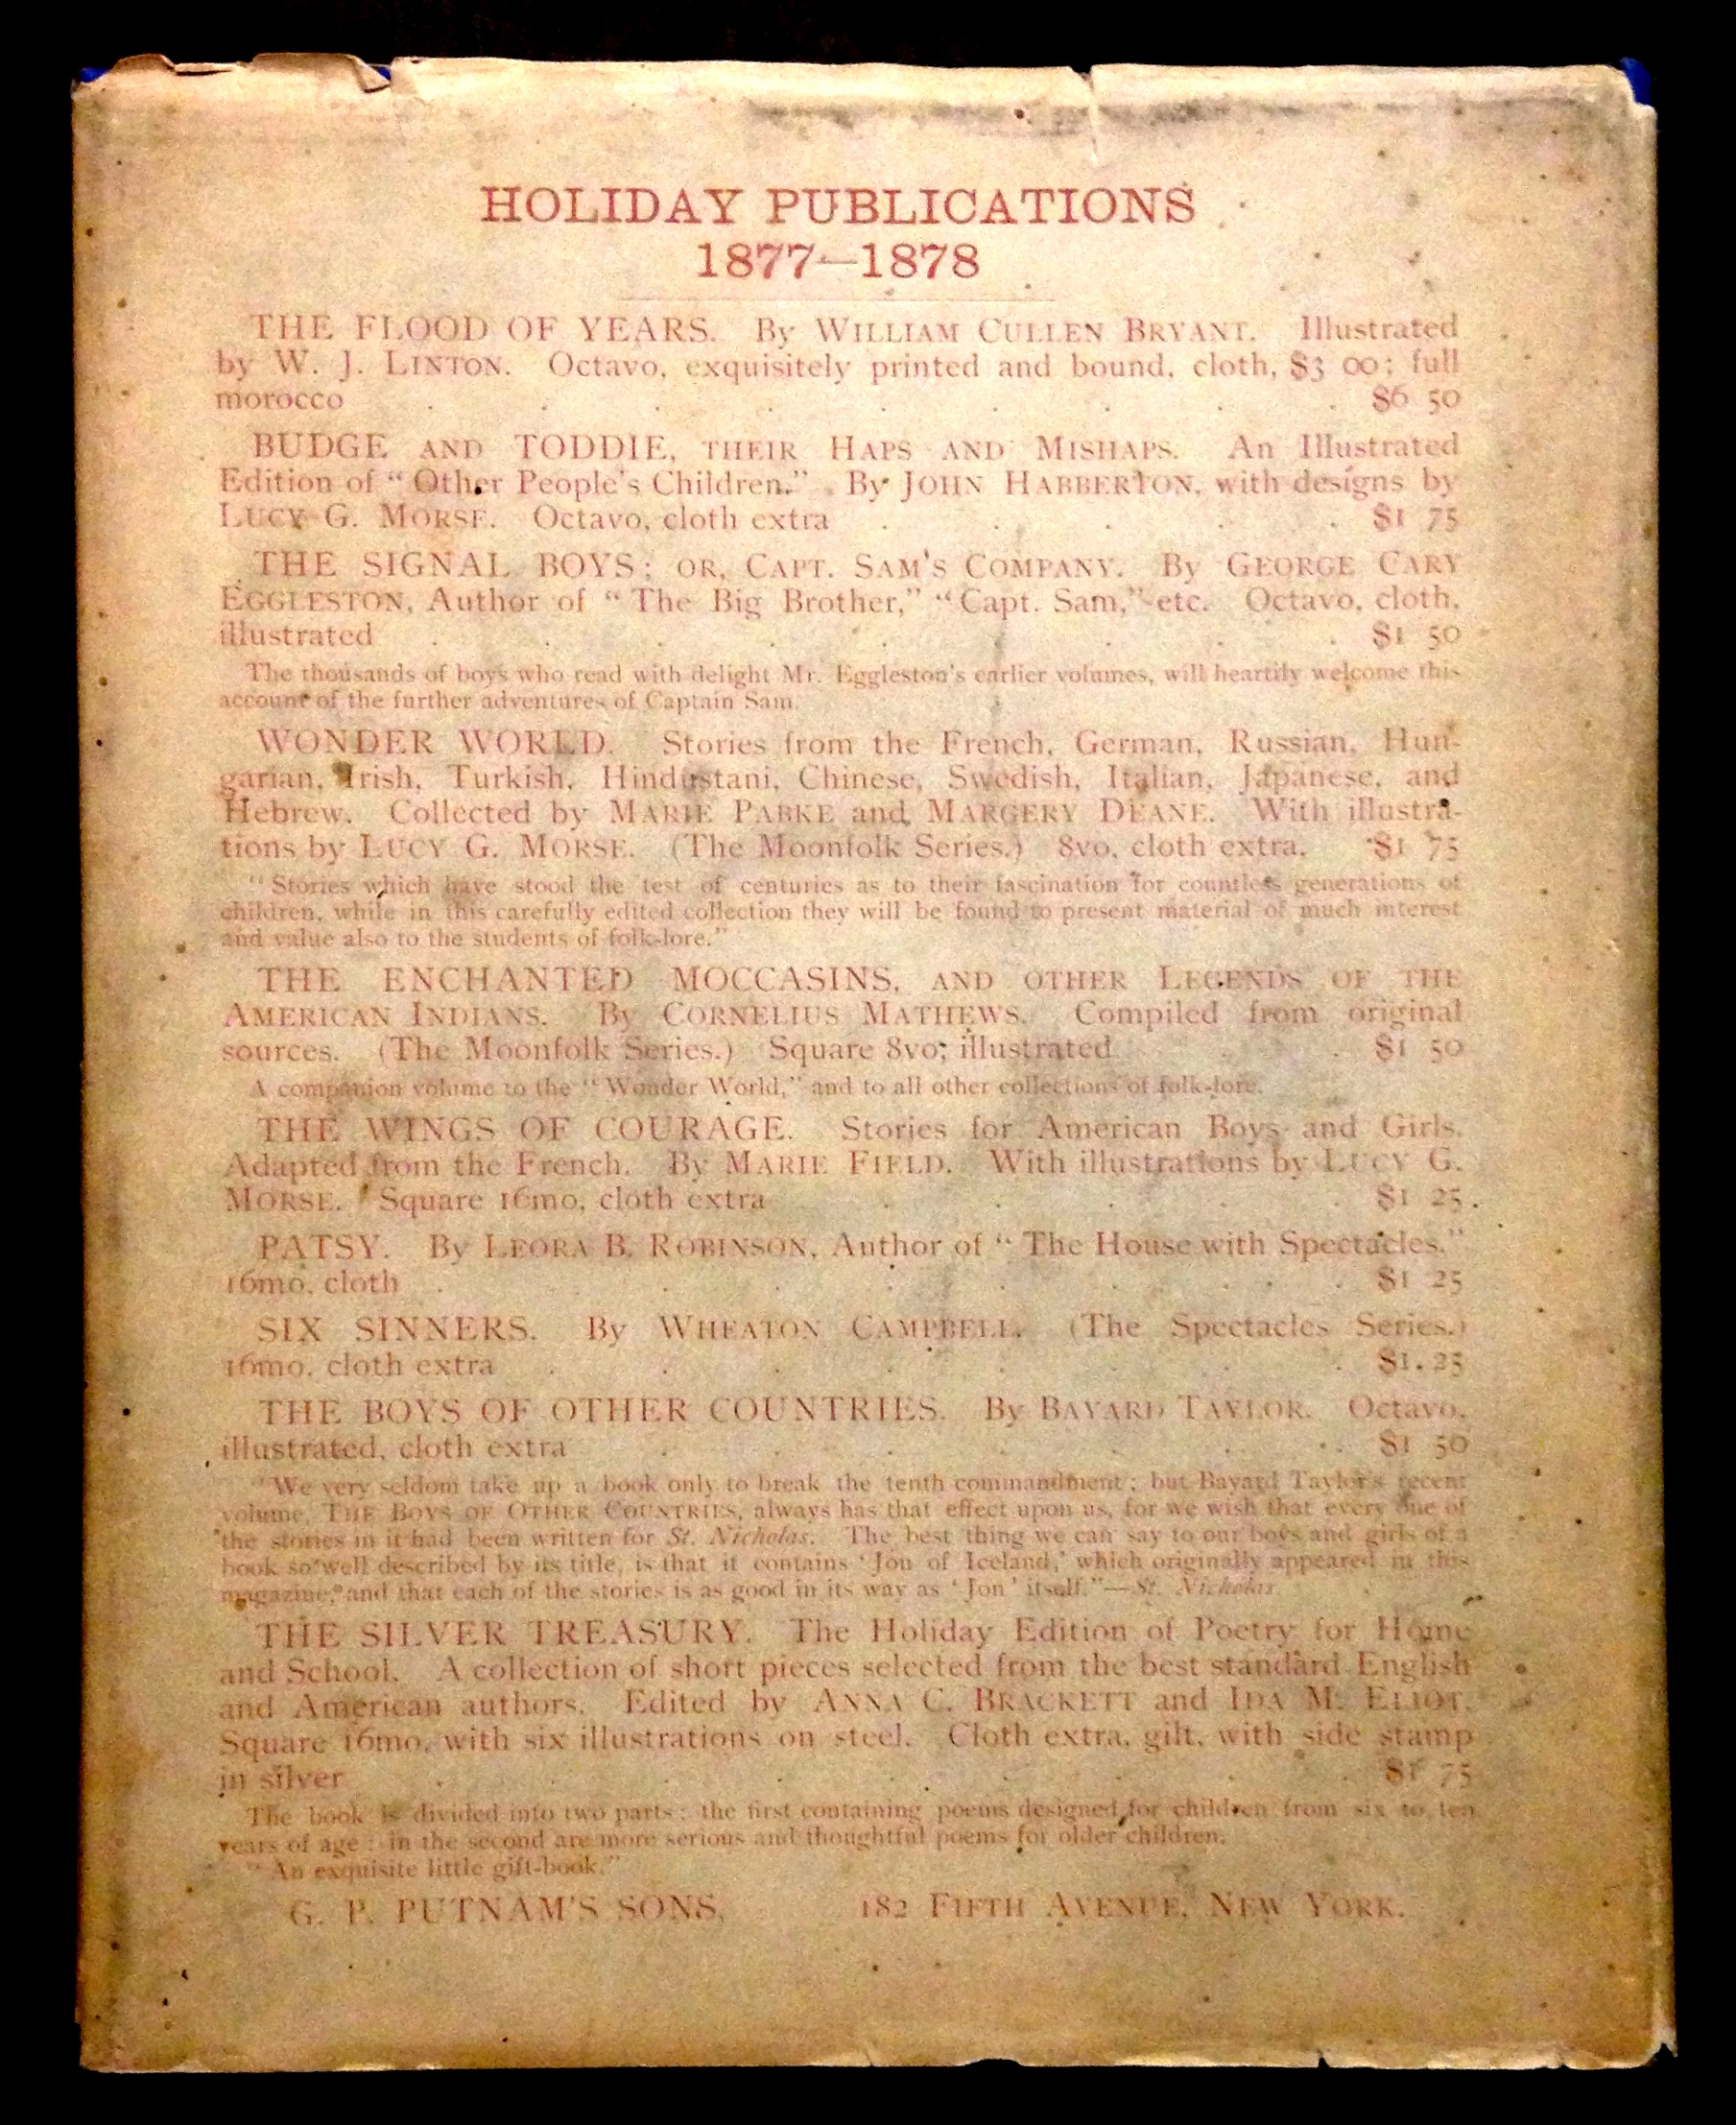 The back panel of this dust jacket, on a presentation copy of William Cullen Bryant's The Flood of Years (New York: G.P. Putnam's sons, 1878) is devoted to ads for this and other Putnam titles, with a new marketing innovation: smaller-print "blurbs" have been added for several books.